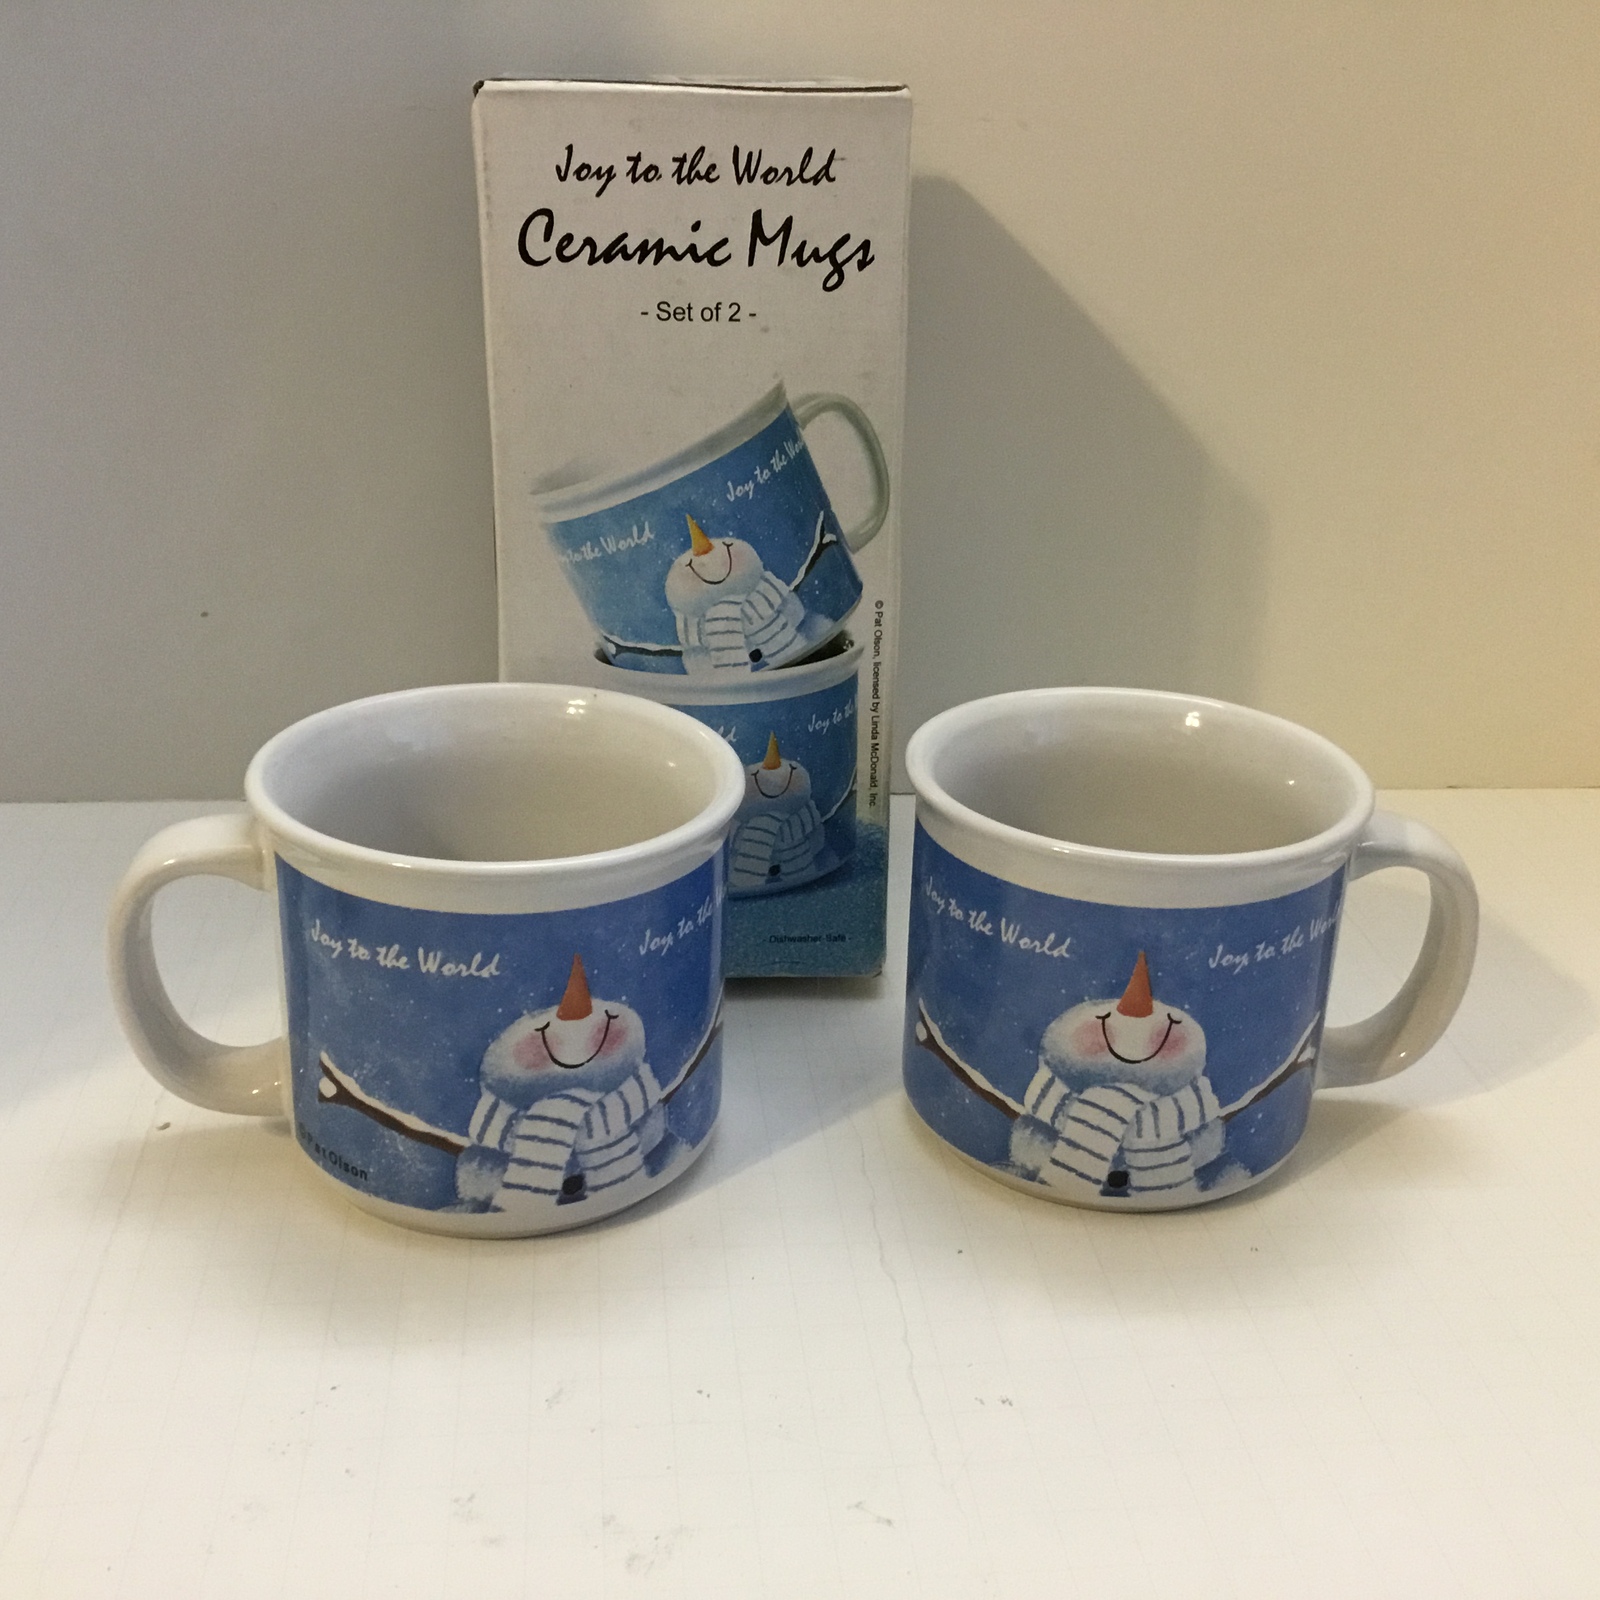 Giftco Ceramic Snowman Mugs Joy to the World Set of 2 - $7.90